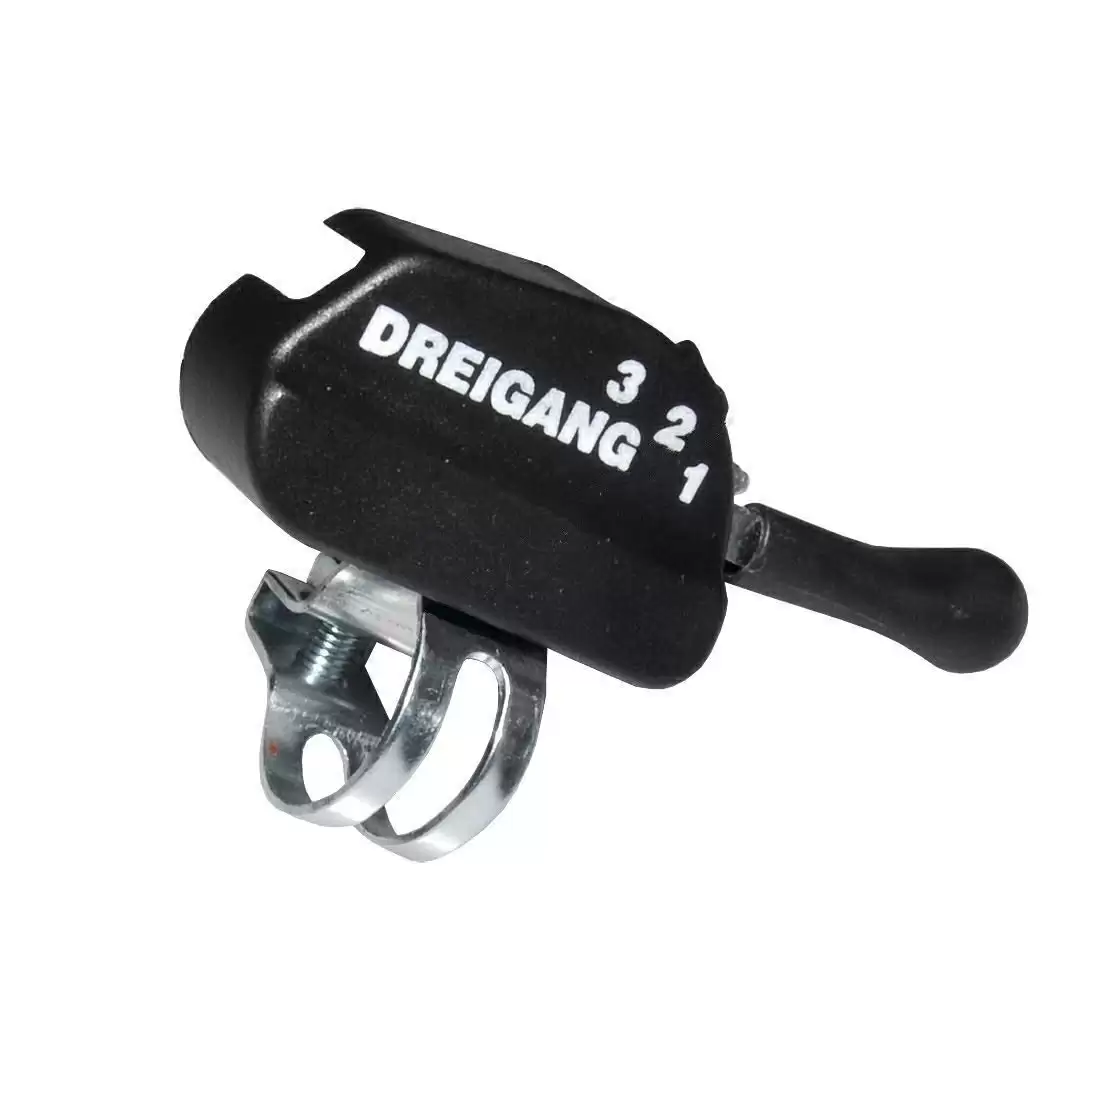 Right 3s trigger shift lever for Sram Spectro T3 and Torpedo hub - image